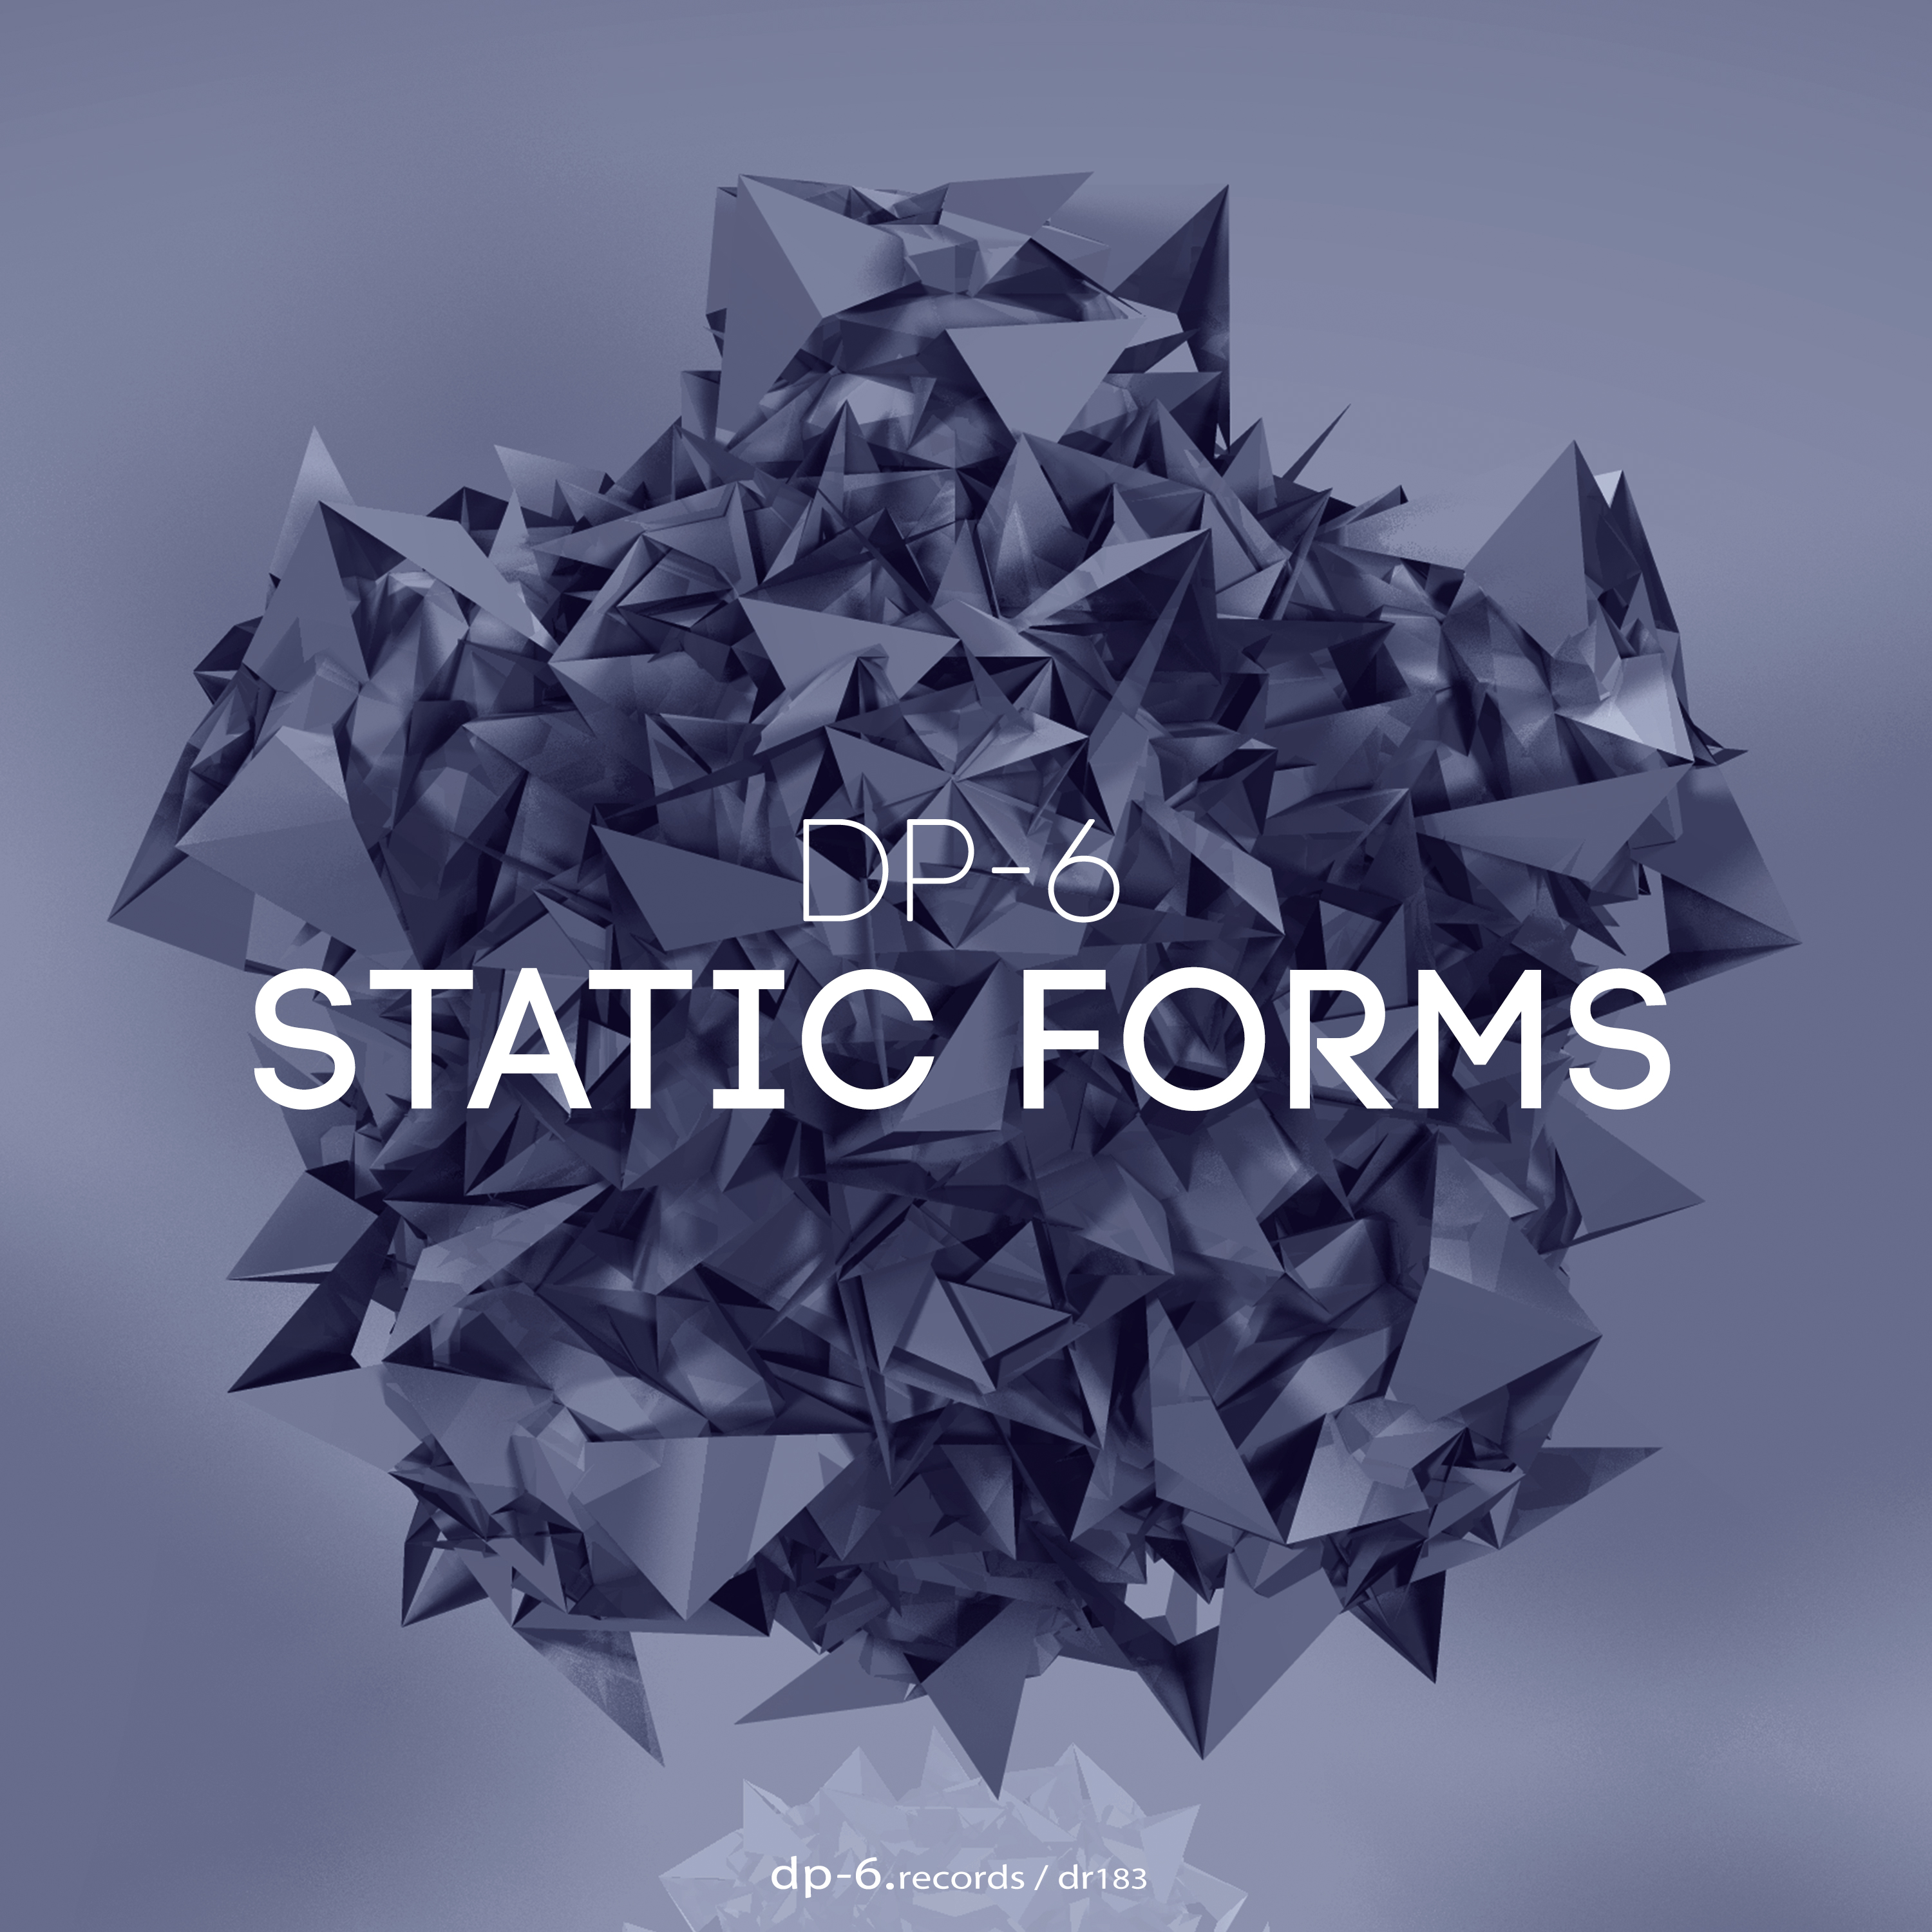 DP-6: Static Forms